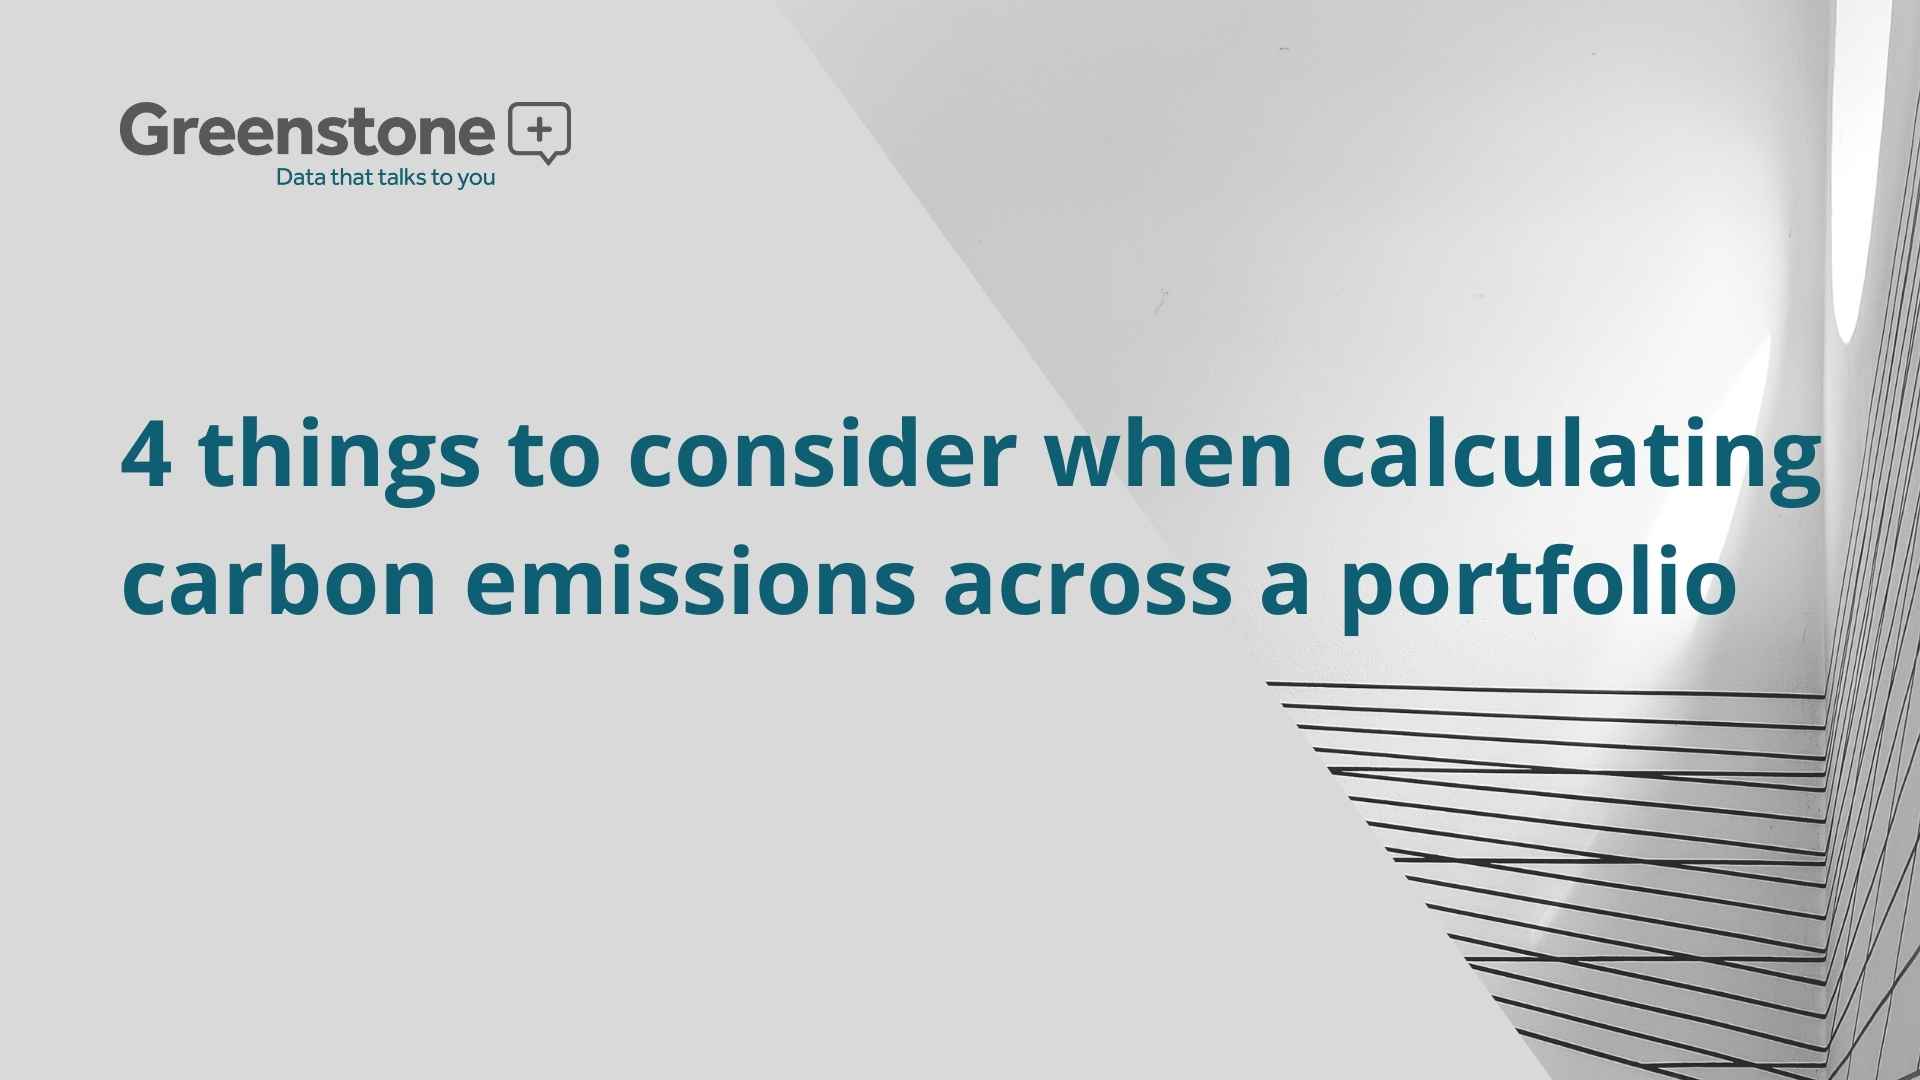 4 things to consider when calculating GHG emissions across a portfolio